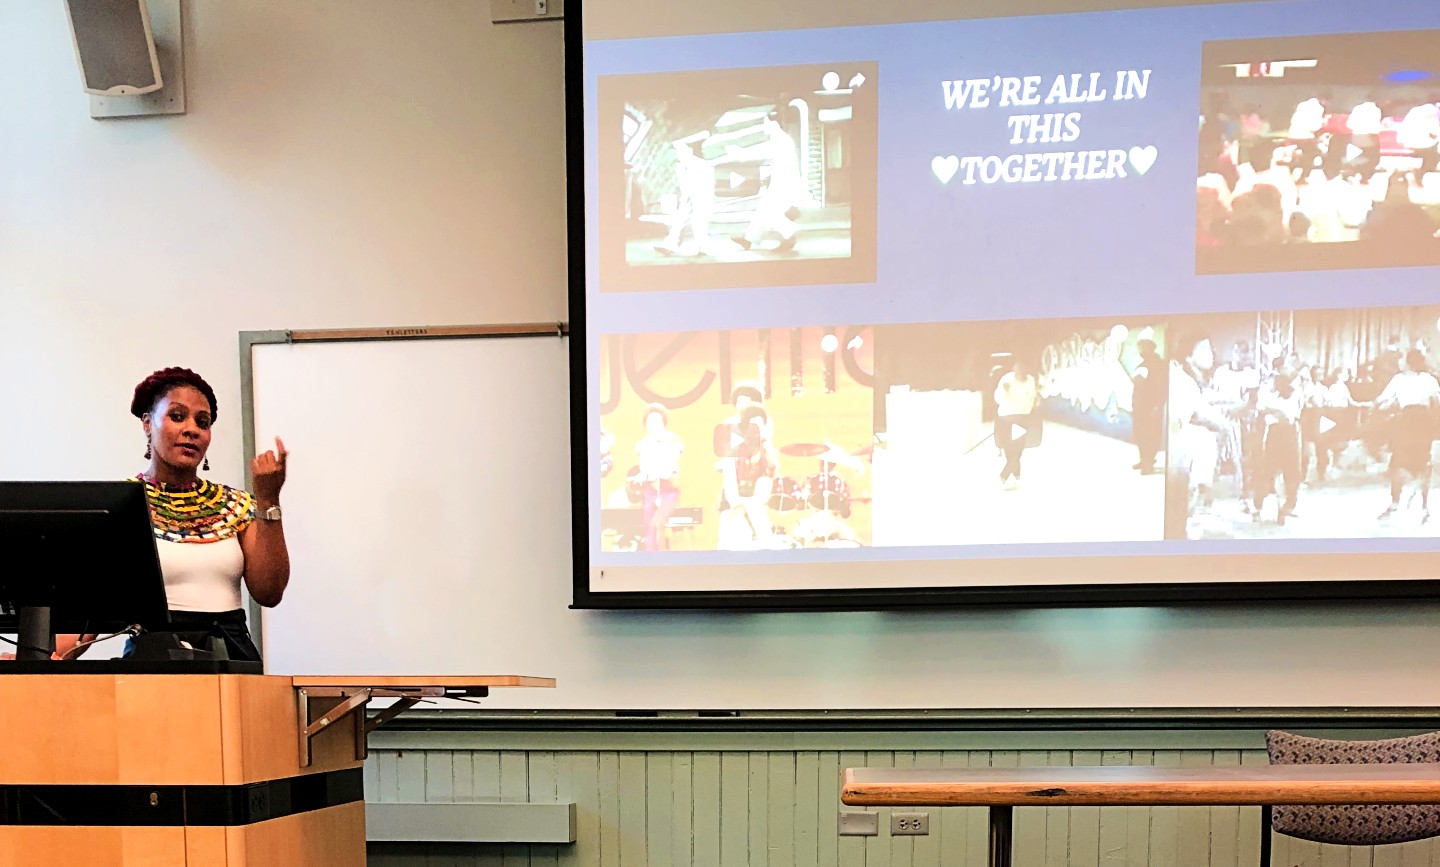 A woman at a computer stand in the middle of talking next to a projector screen displaying photos and the text, "We're all in this together" with a heart on each side of the word "together".